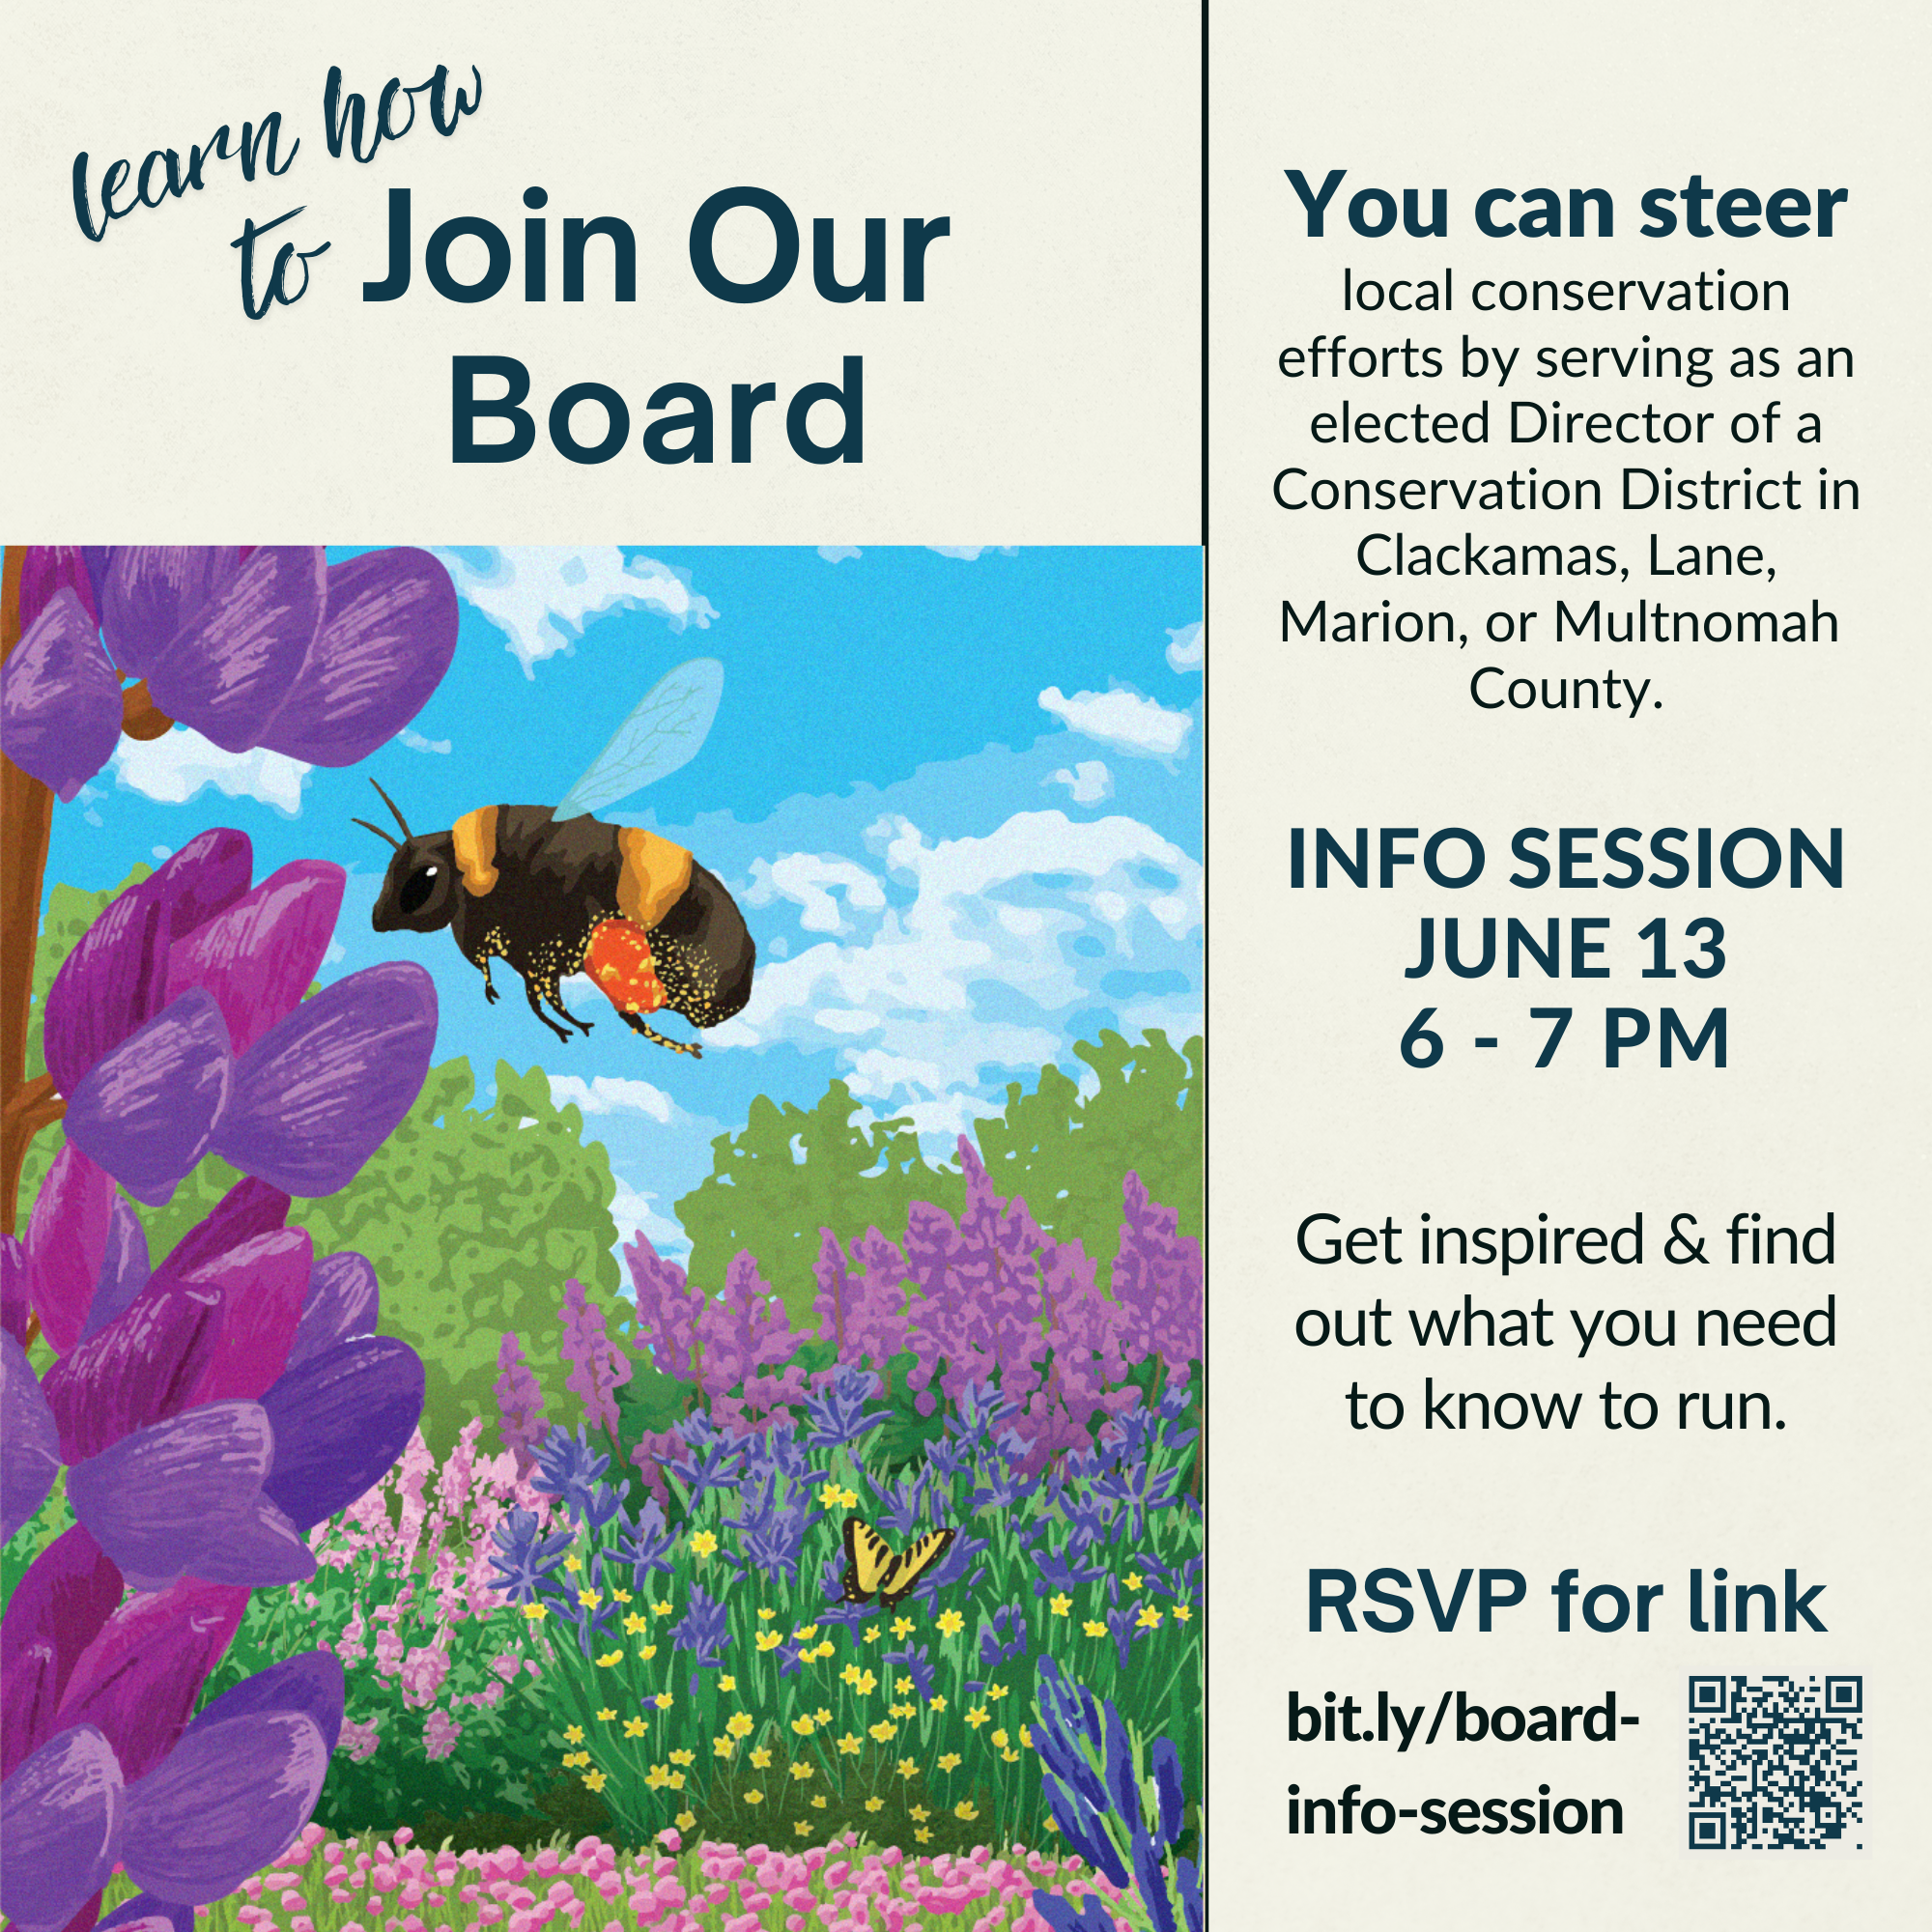 a square graphic with an image of a bee visiting a purple lupine flower in a naitve plant garden and info about the Learn How to Join Our Board webinar on June 13 at 6 pm RSVP at bit.ly/join-our-board